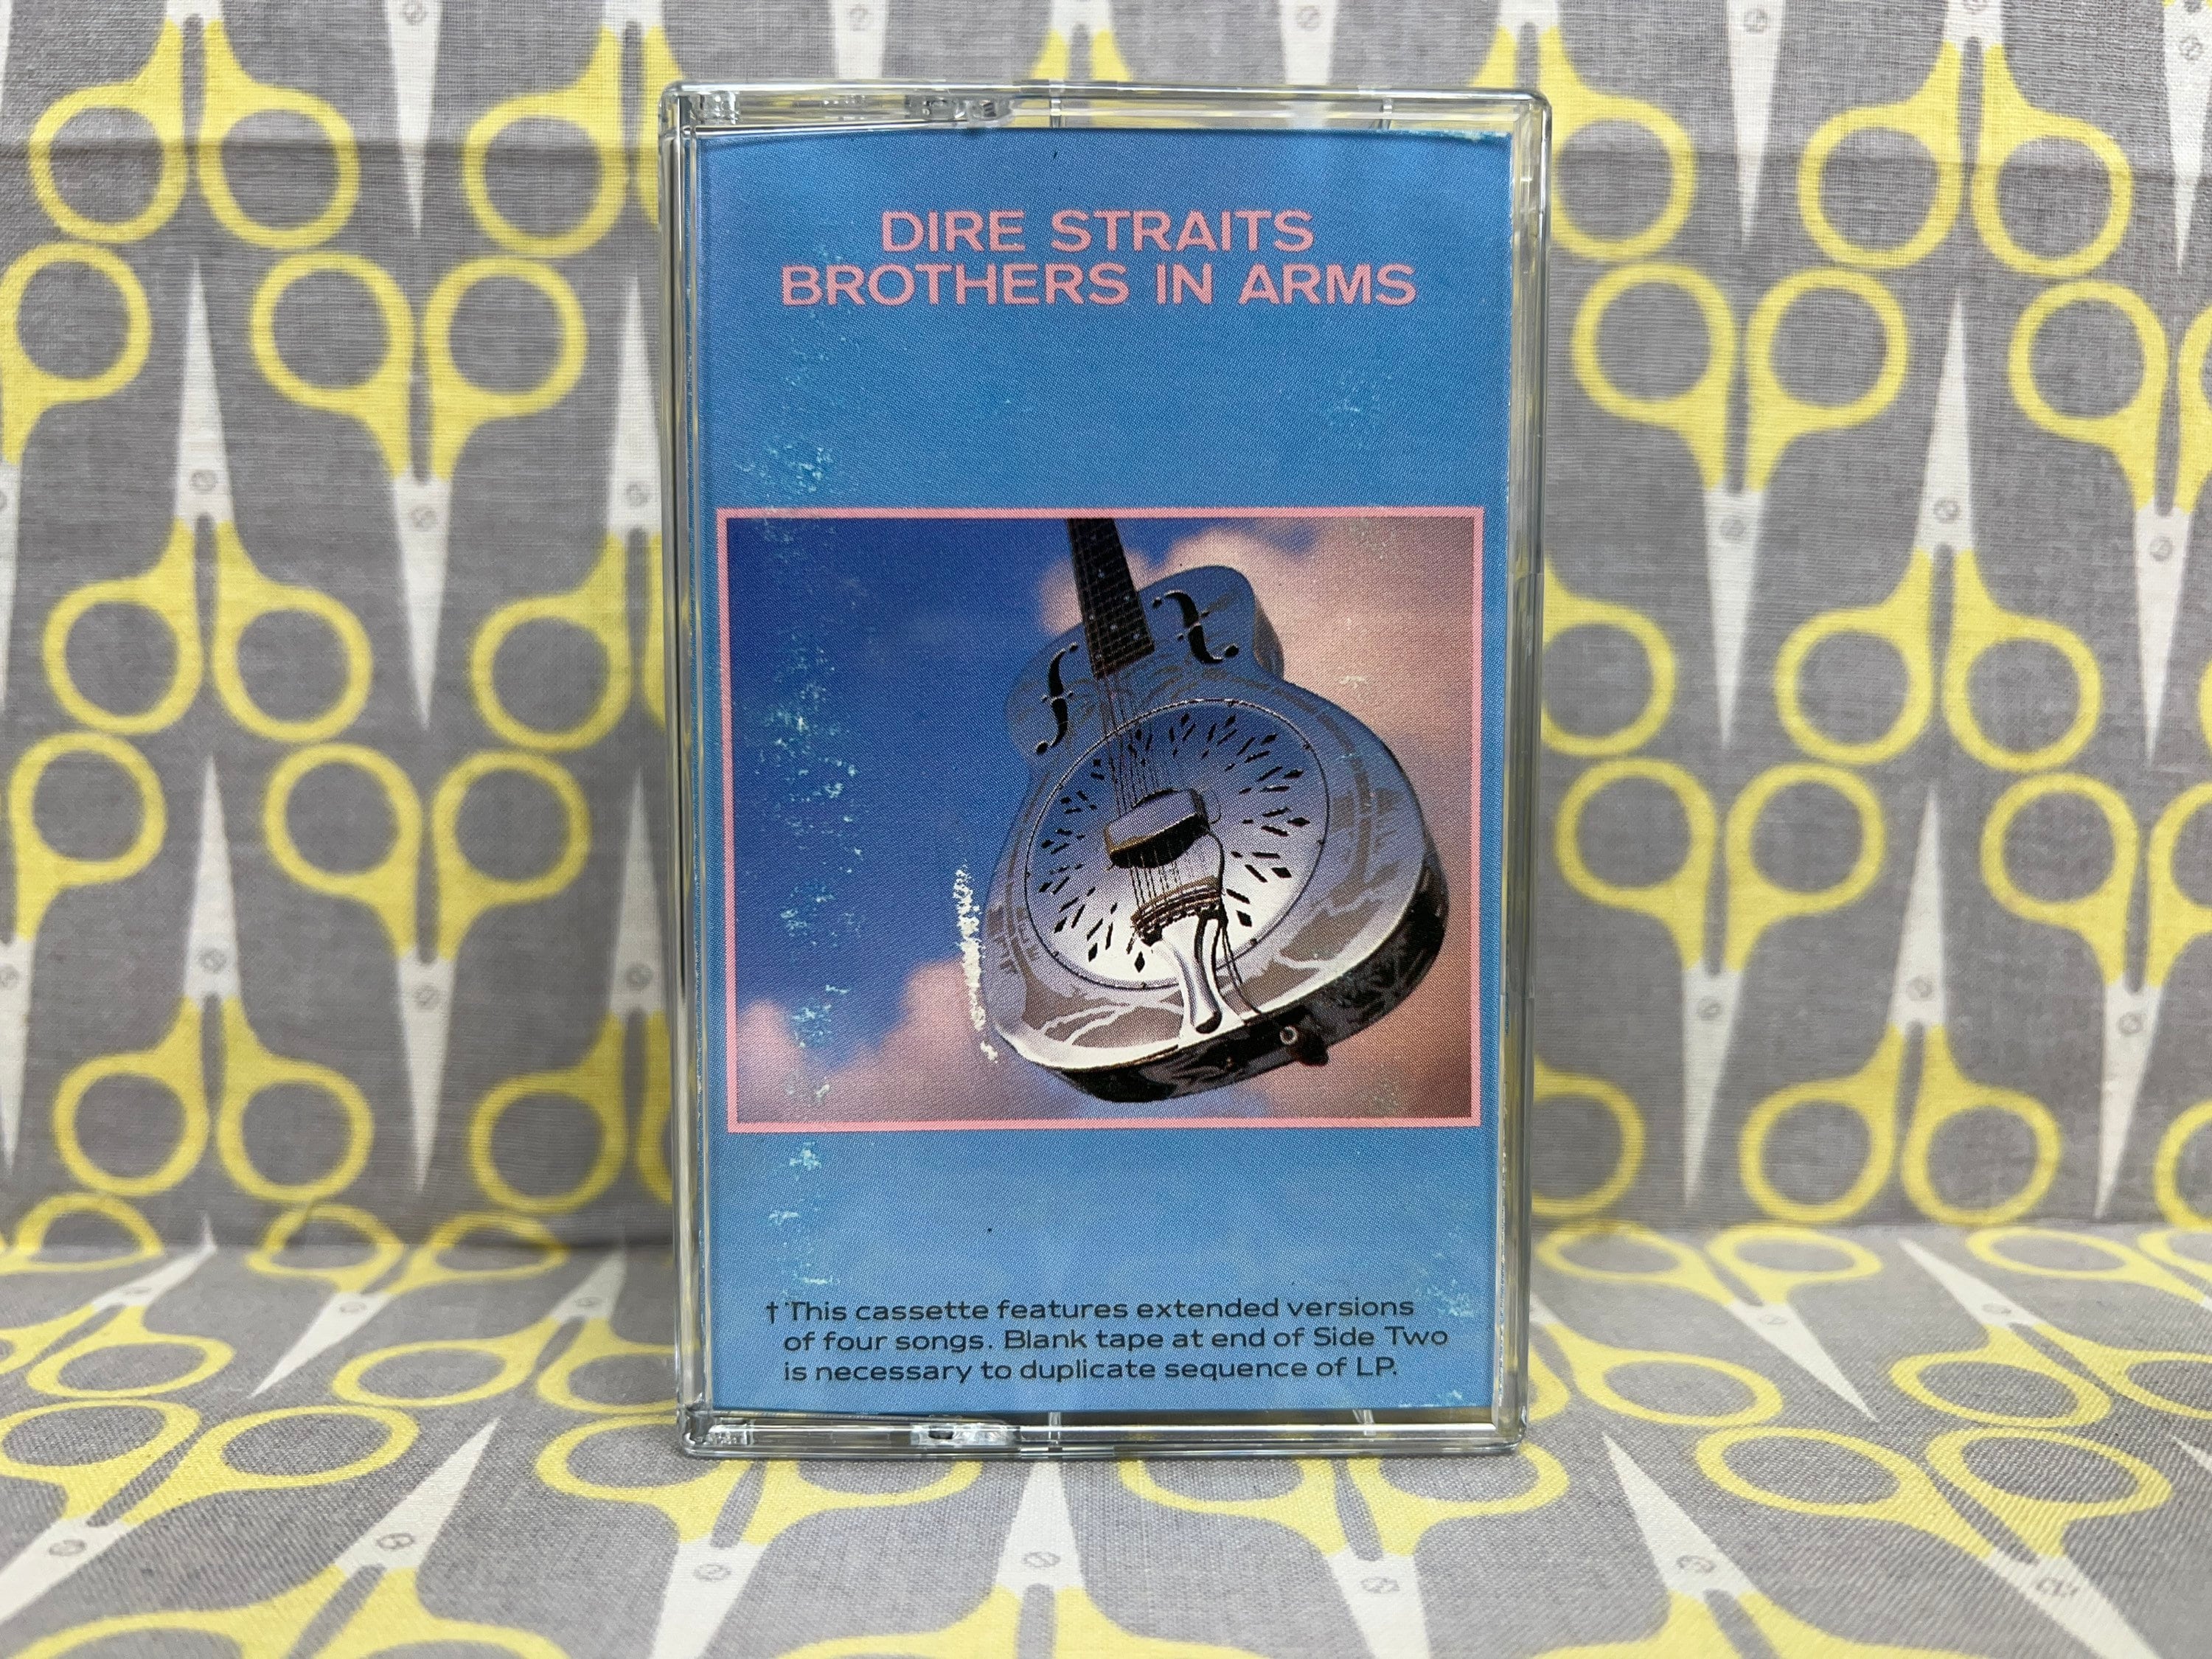 Brothers in arms